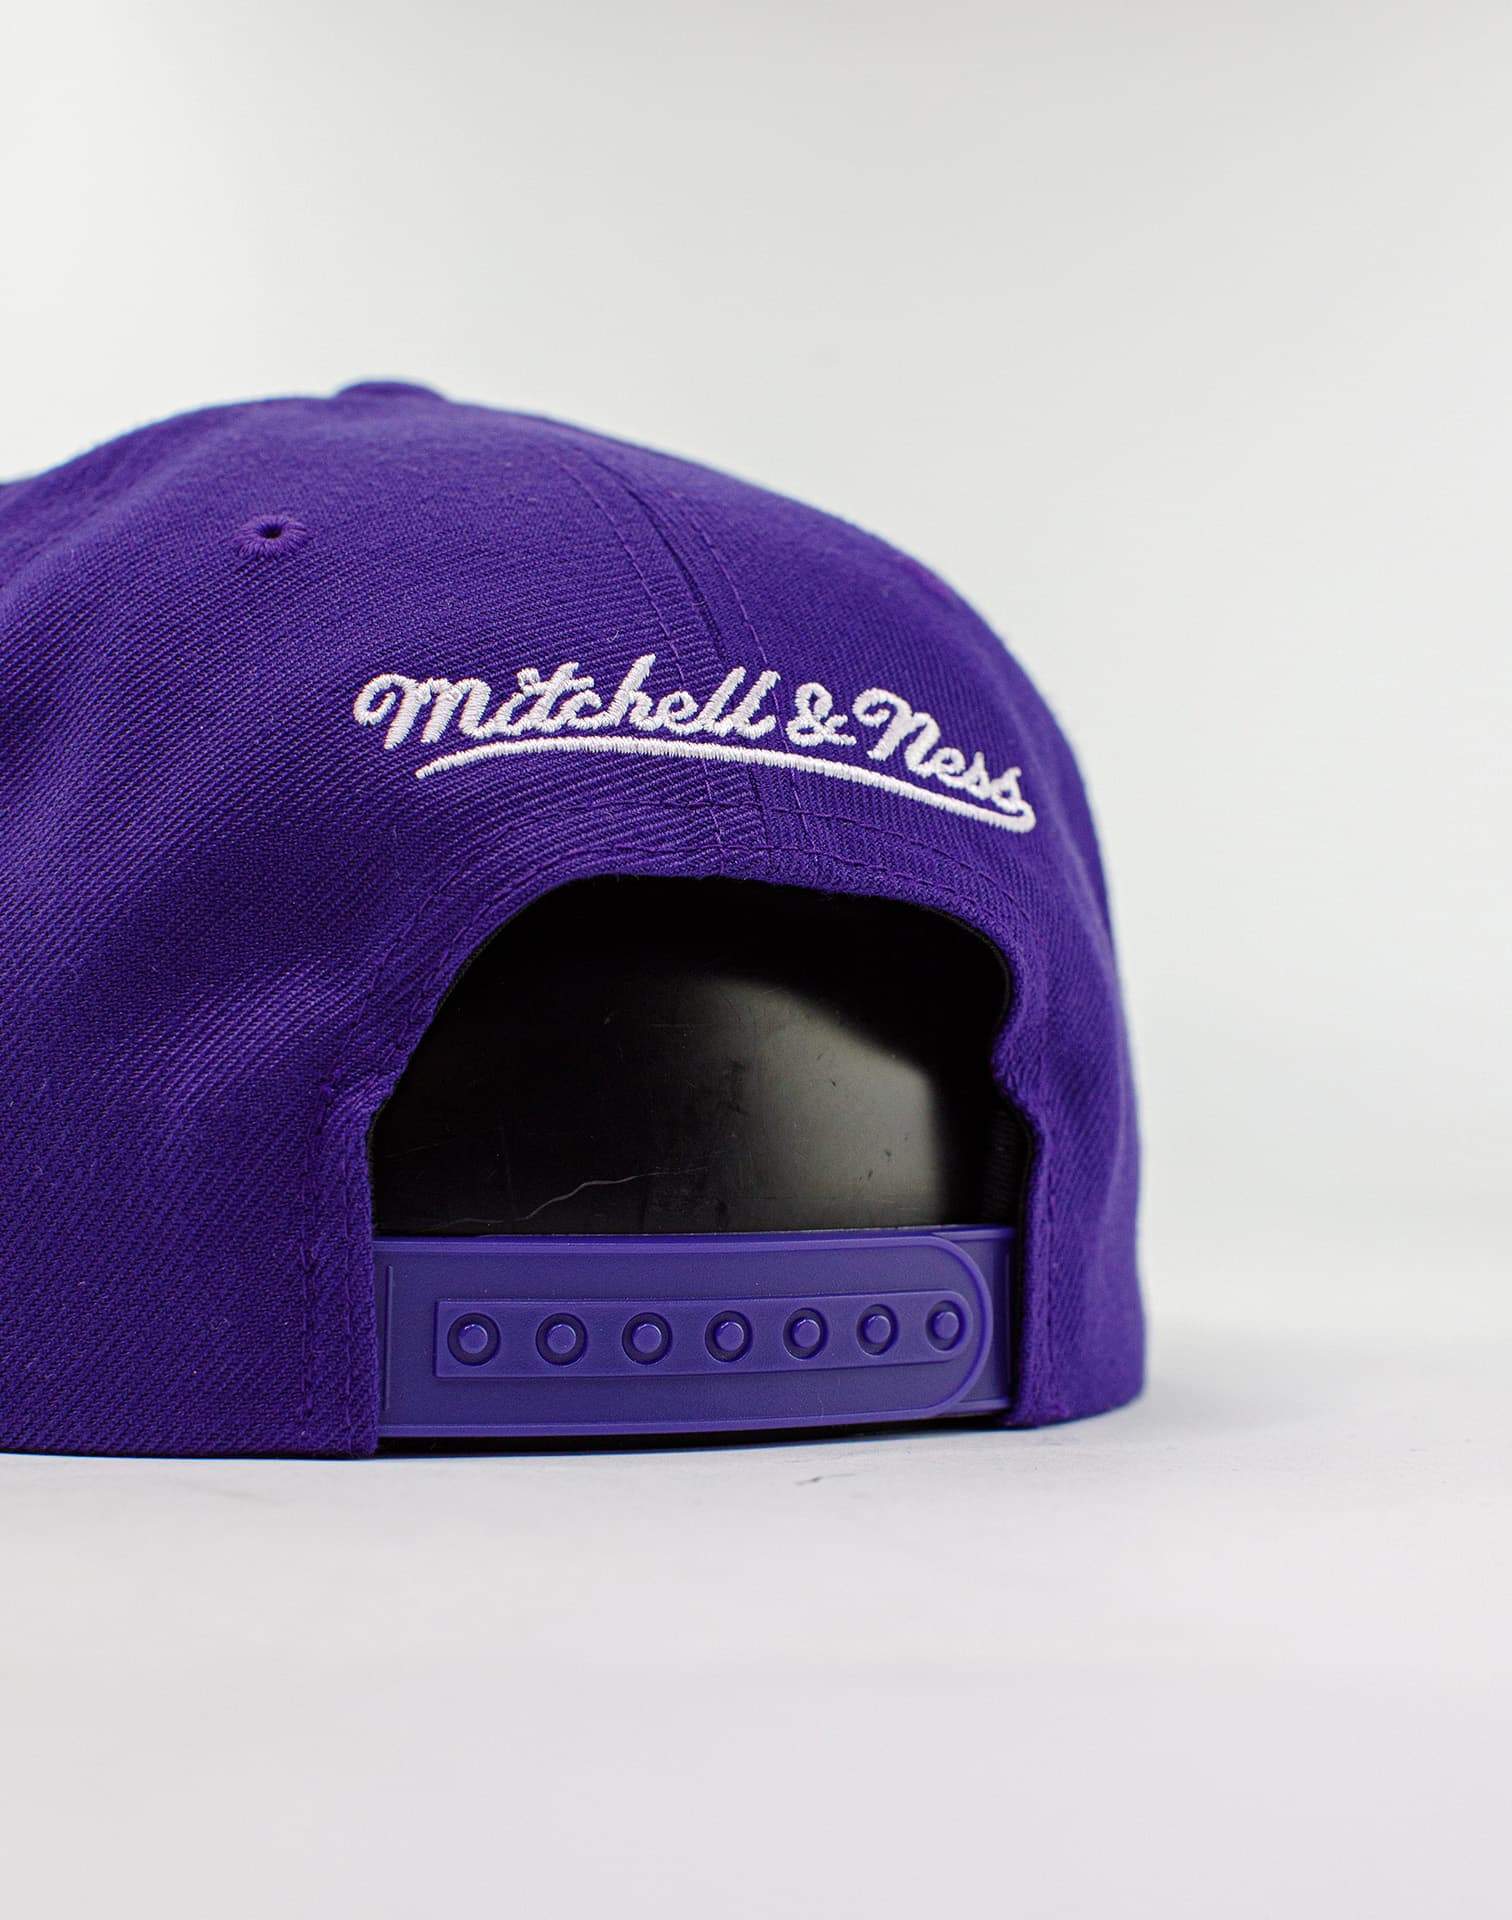 Mitchell & Ness Teams up with DTLR on Exclusive NBA Capsule